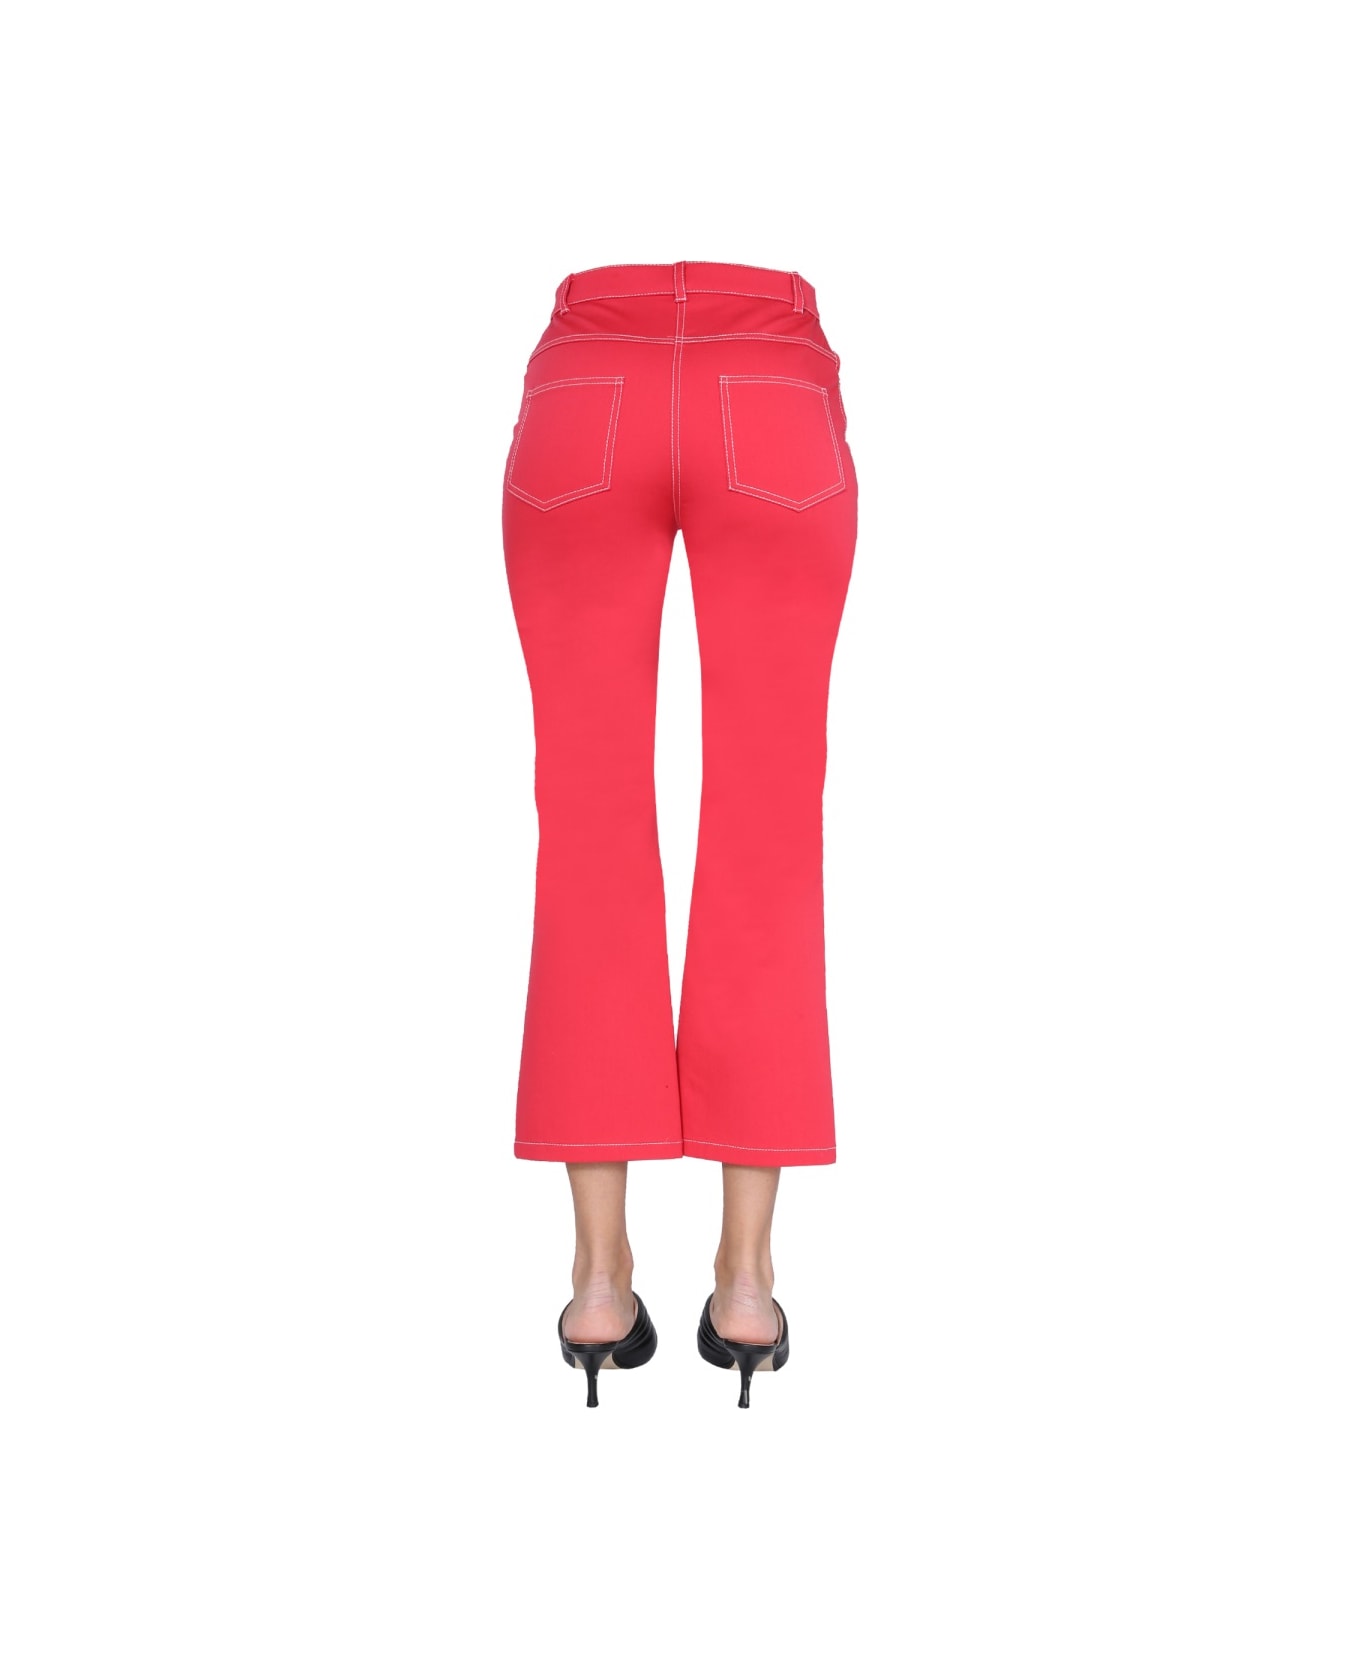 Boutique Moschino Skinny Kick Jeans - RED